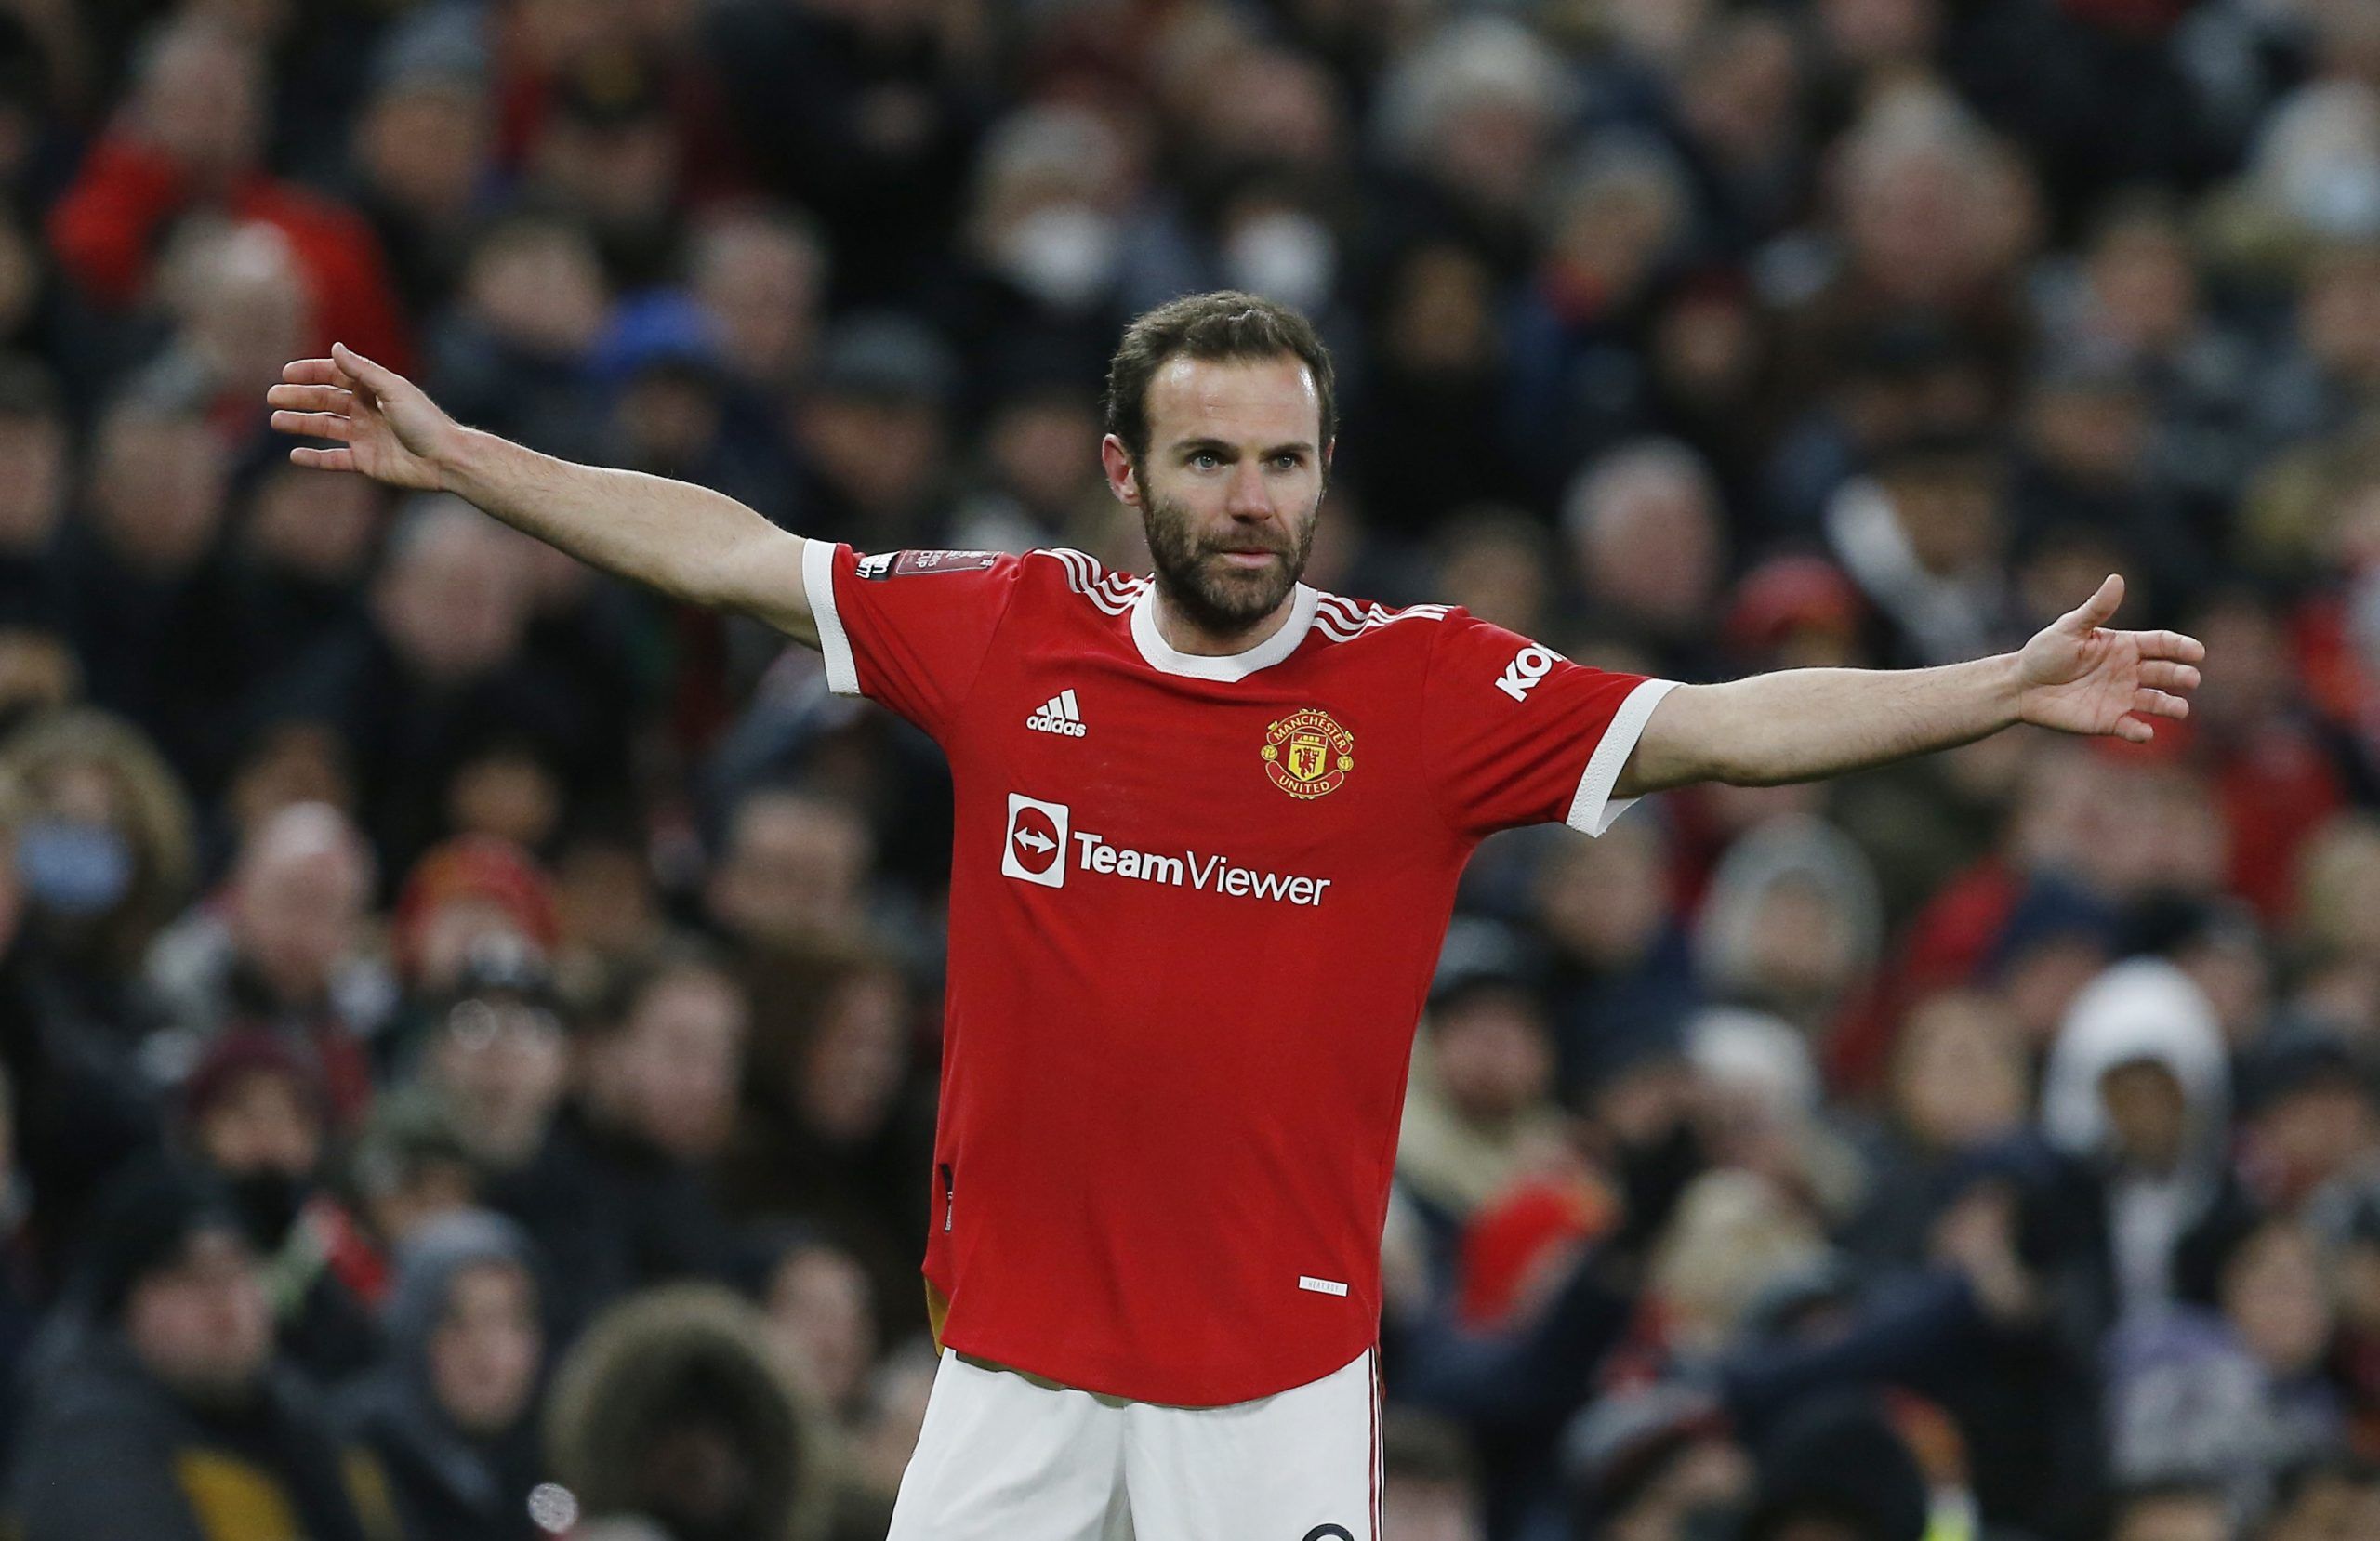 Soccer Football - FA Cup Fourth Round - Manchester United v Middlesbrough - Old Trafford, Manchester, Britain - February 4, 2022 Manchester United's Juan Mata reacts REUTERS/Craig Brough